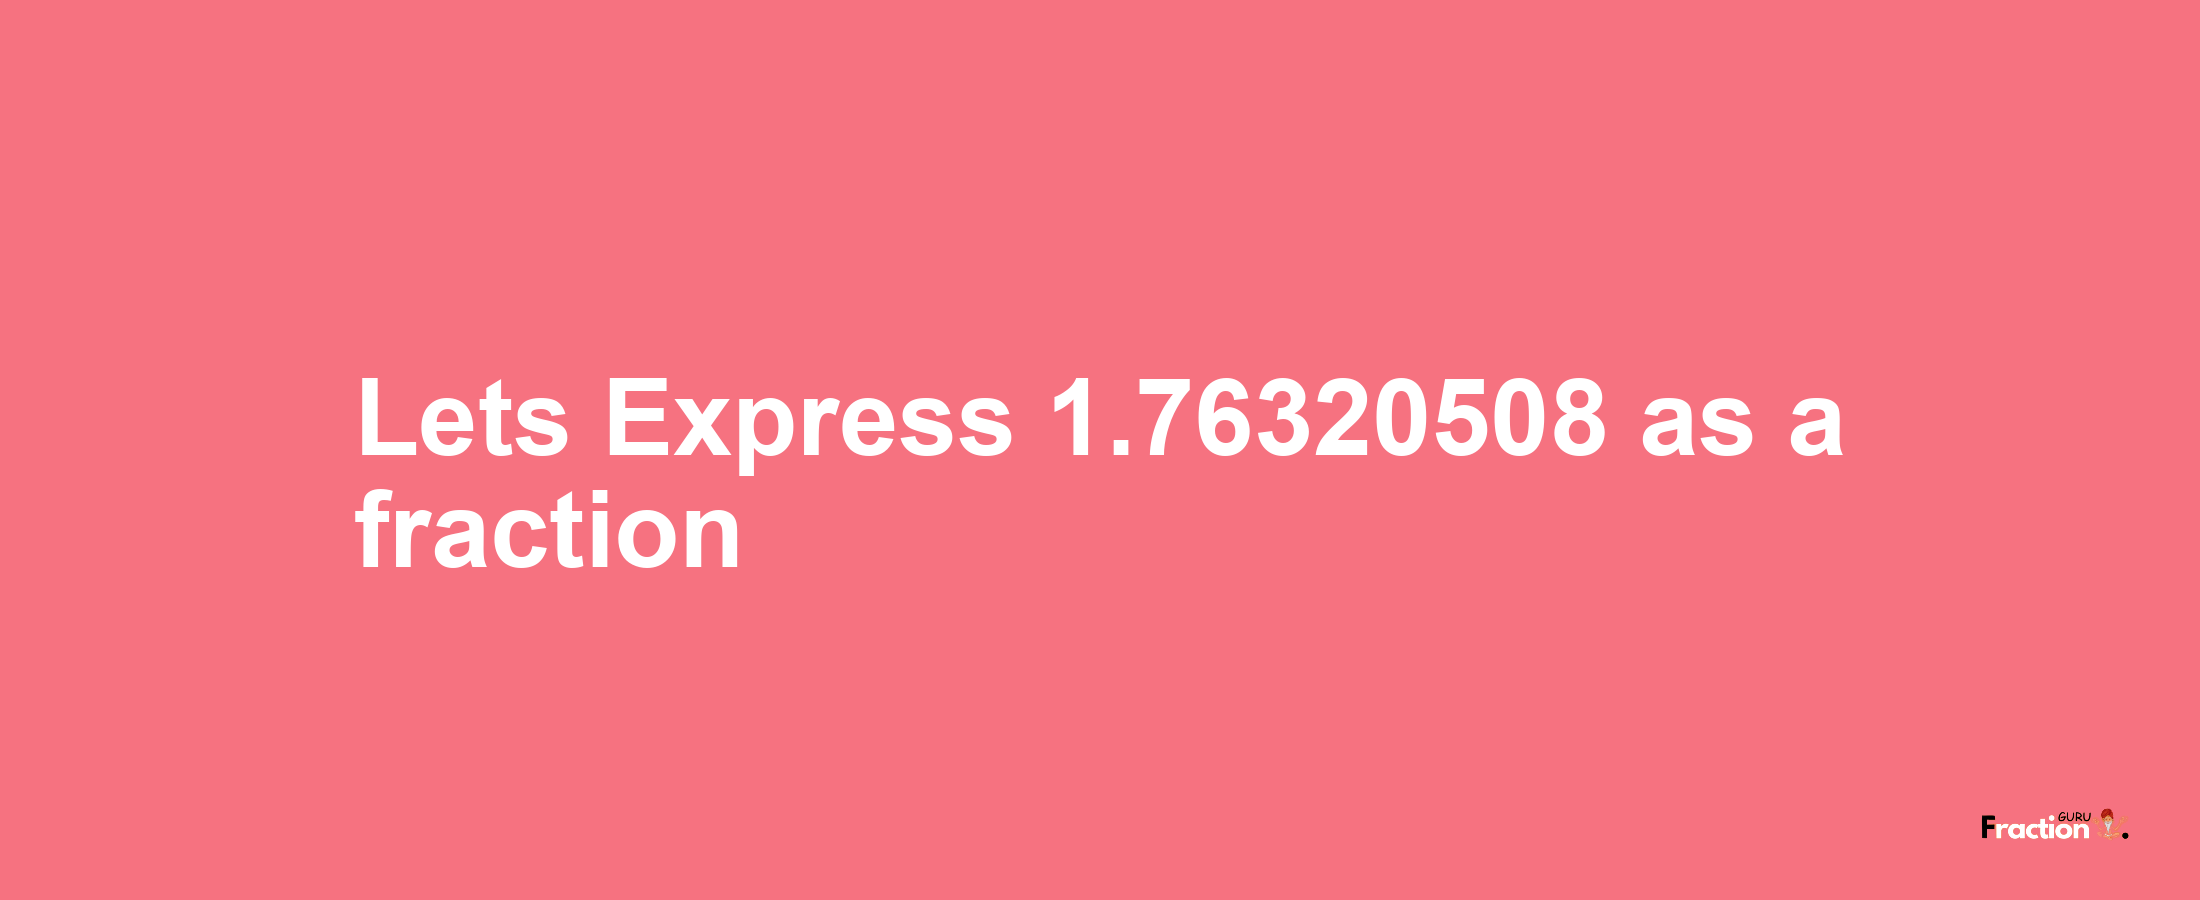 Lets Express 1.76320508 as afraction